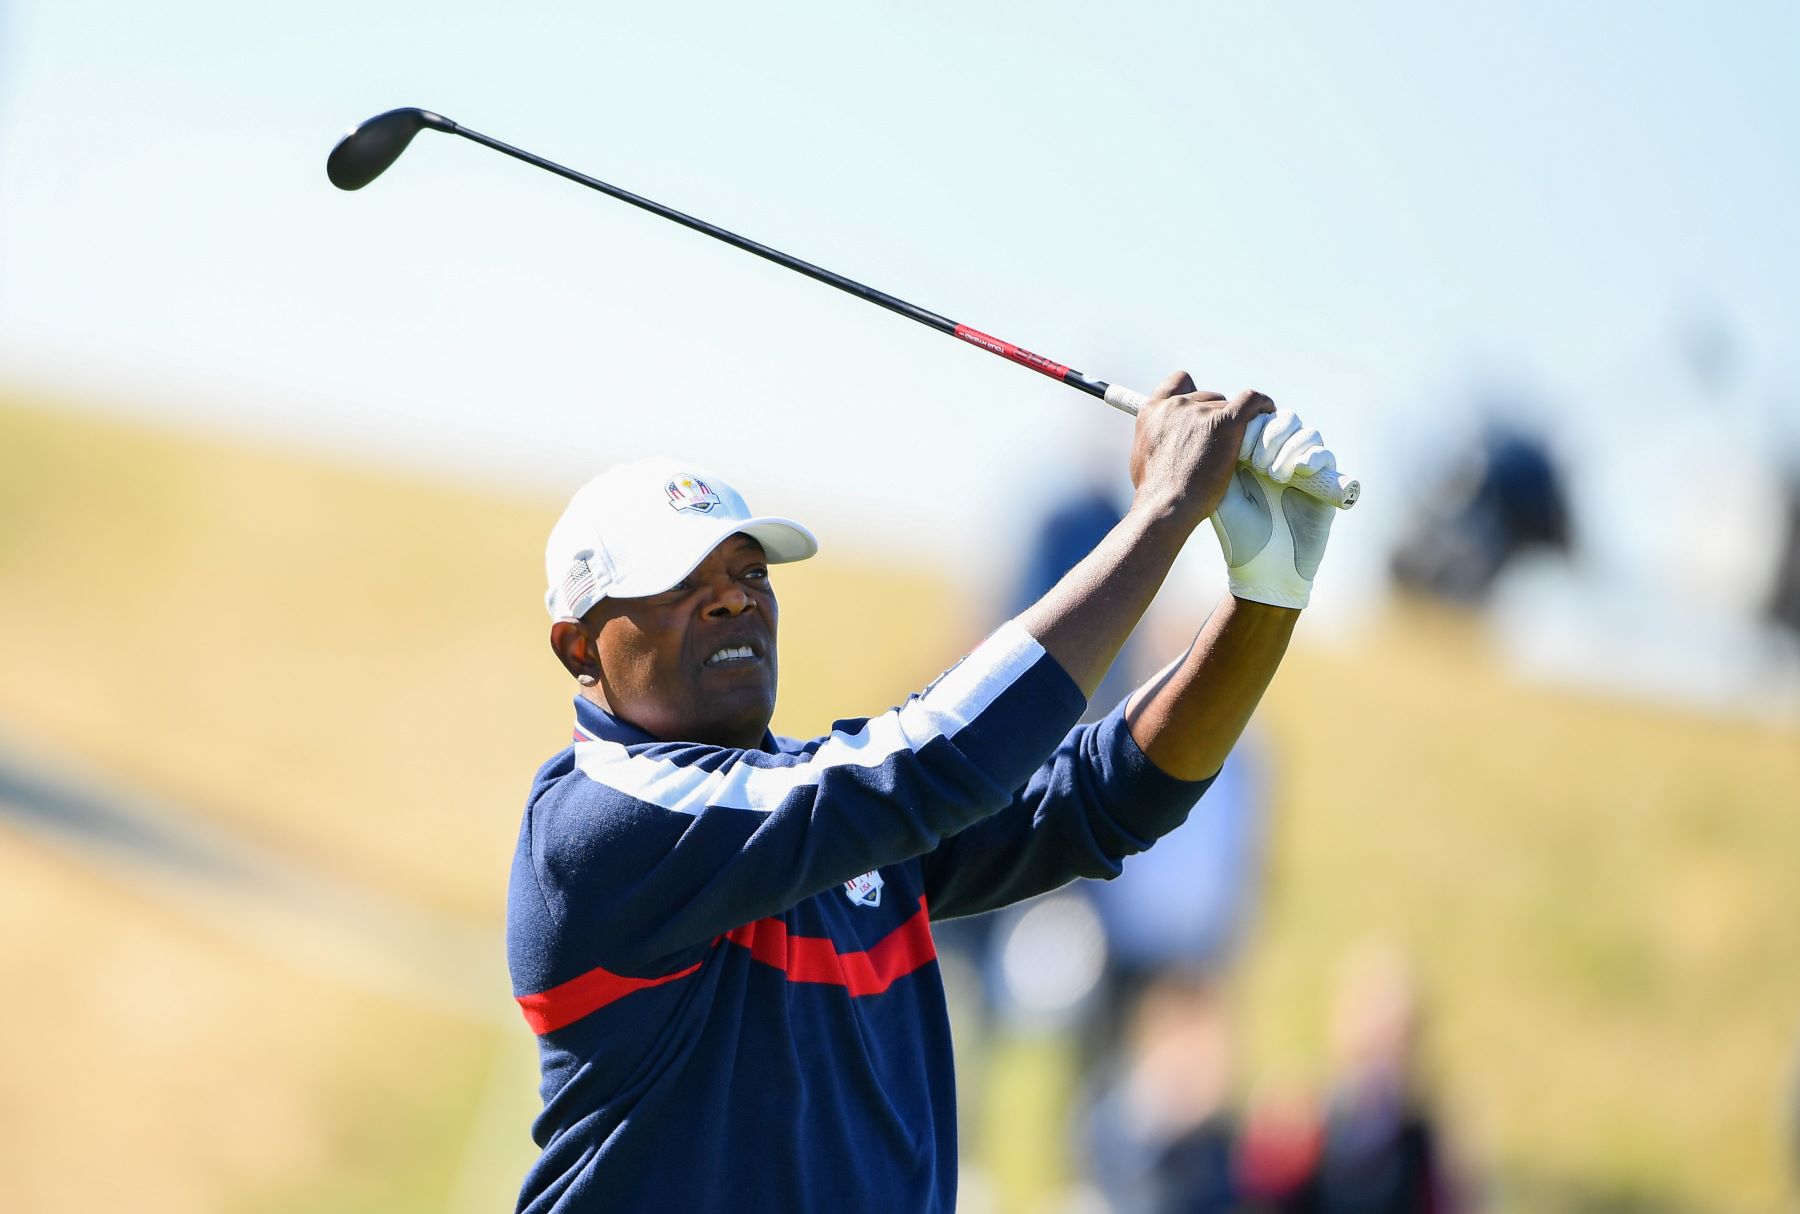 Samuel L. Jackson playing golf at the 2018 Ryder Cup at Le Golf National in Paris, France